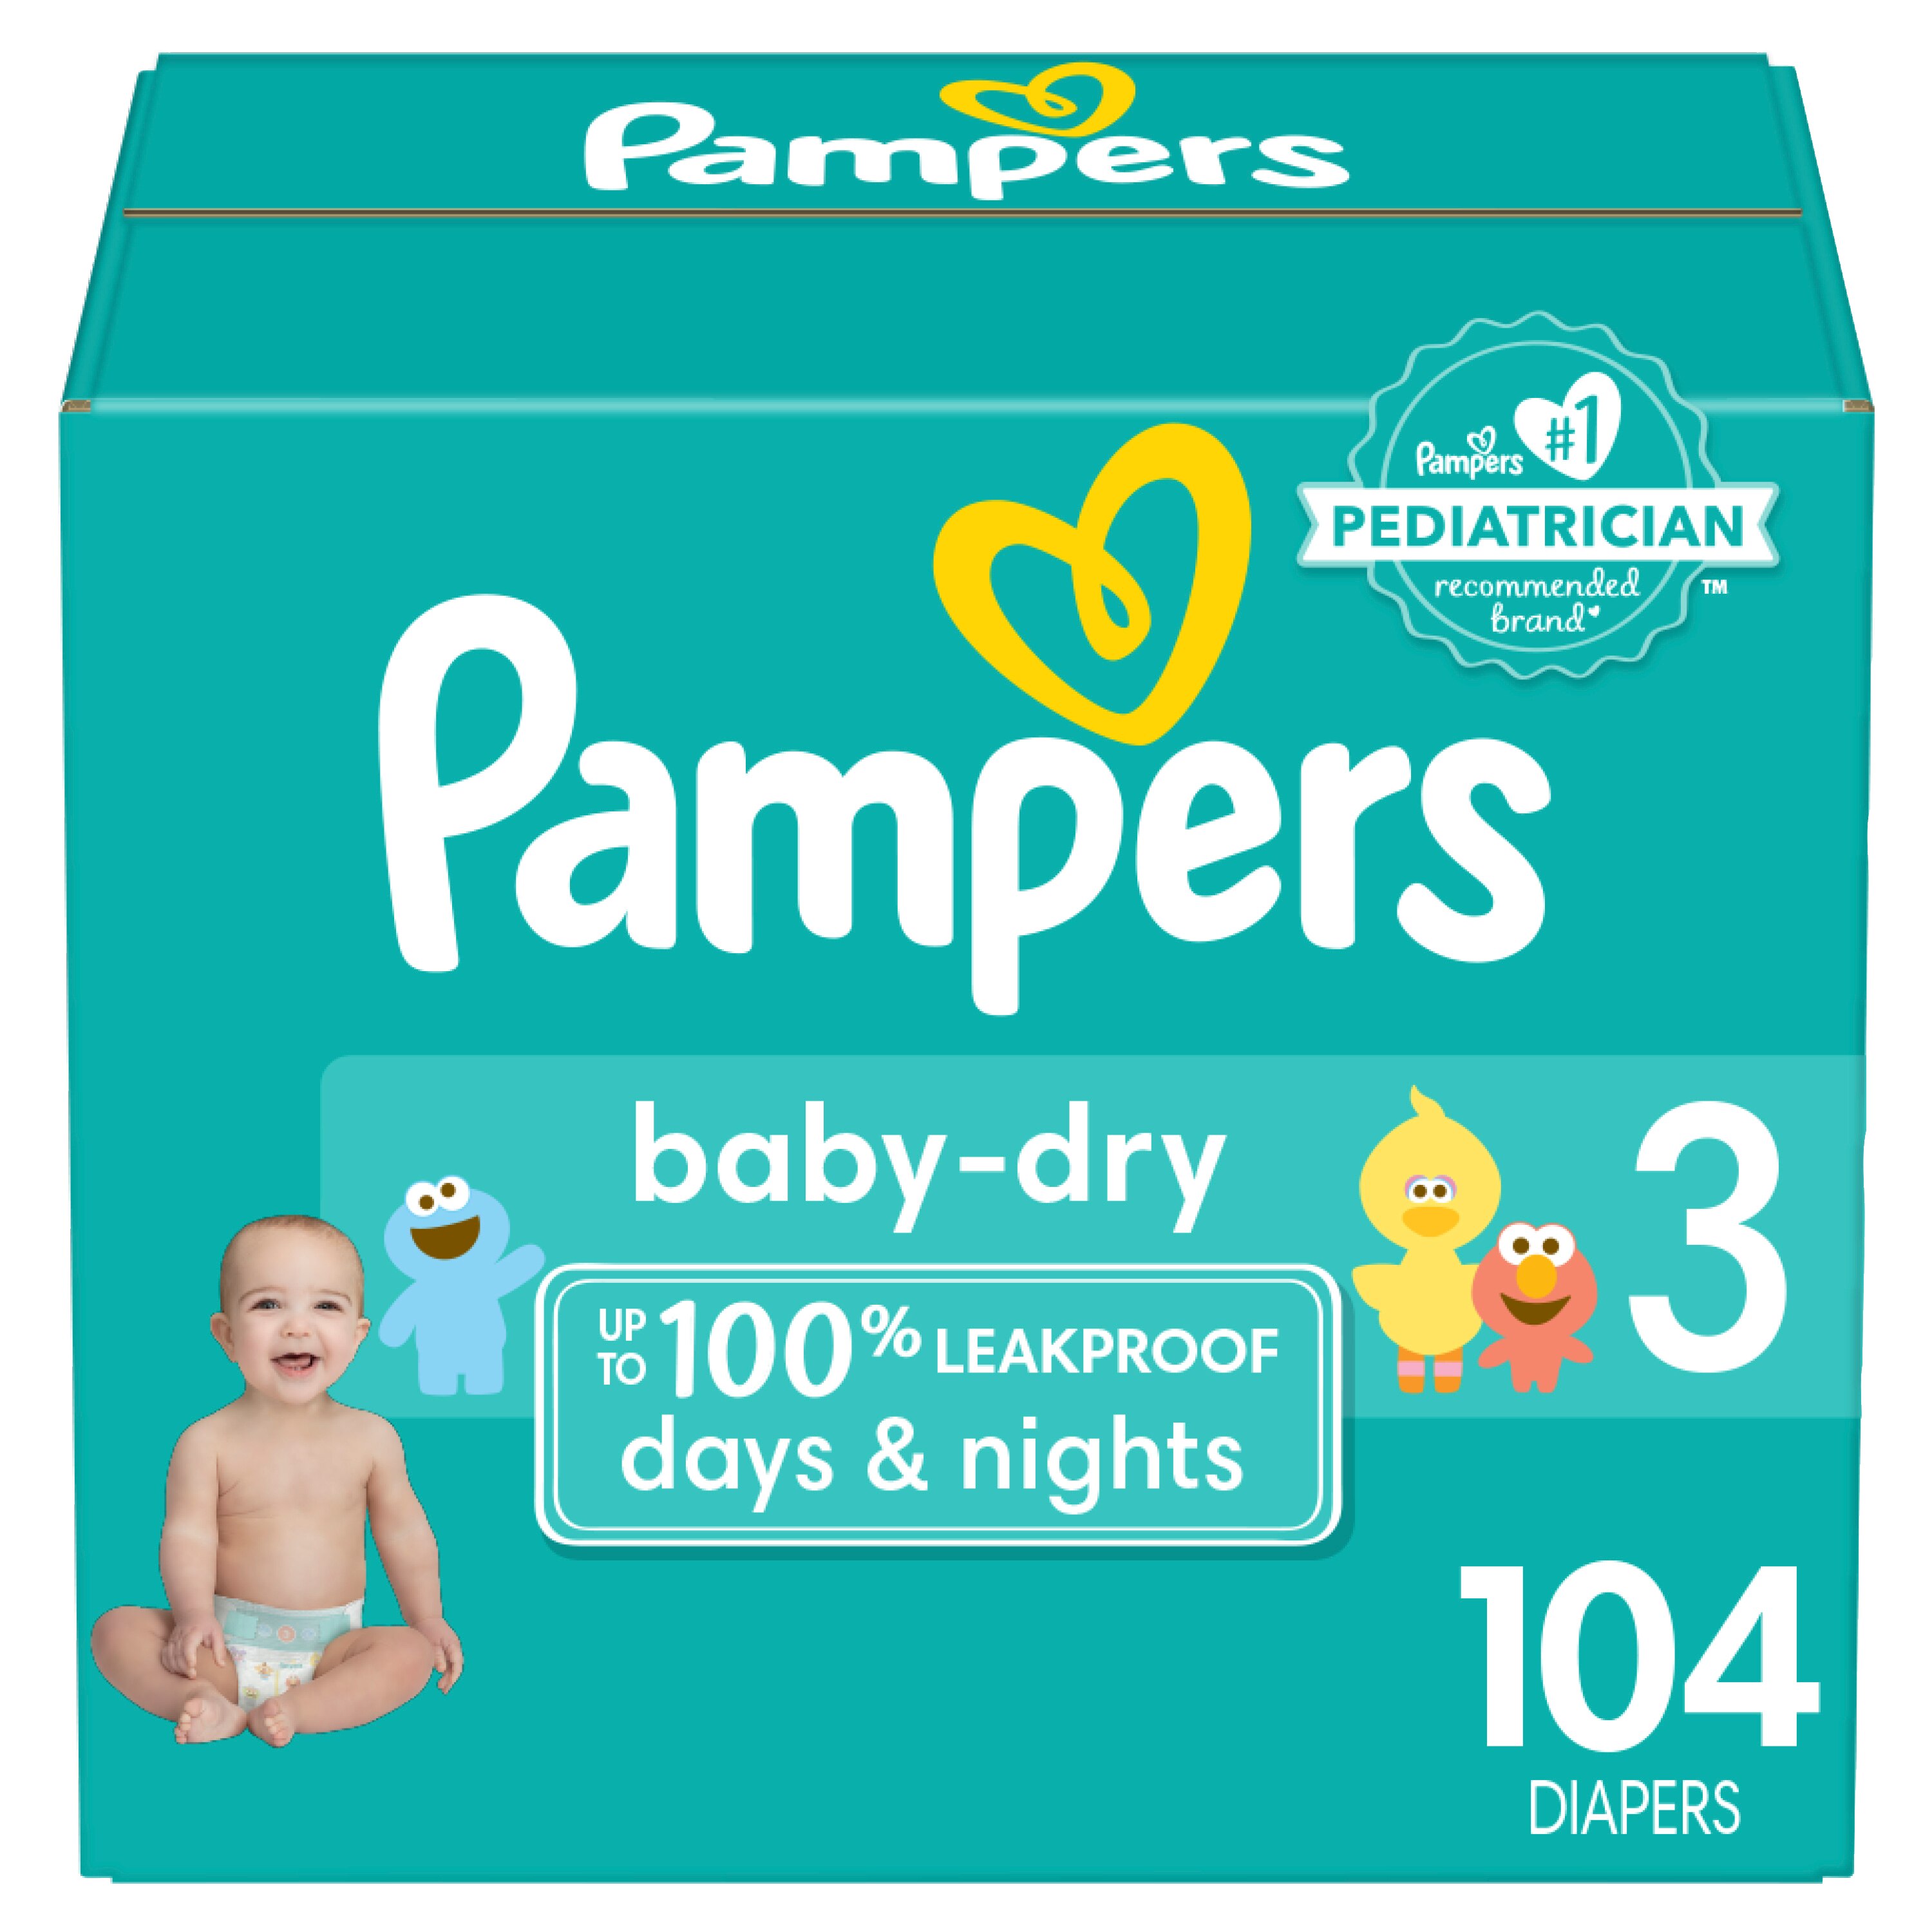 venijn pantoffel Over instelling Pampers Baby Dry Pack Diapers, Size 3, 104 Count - CVS Pharmacy